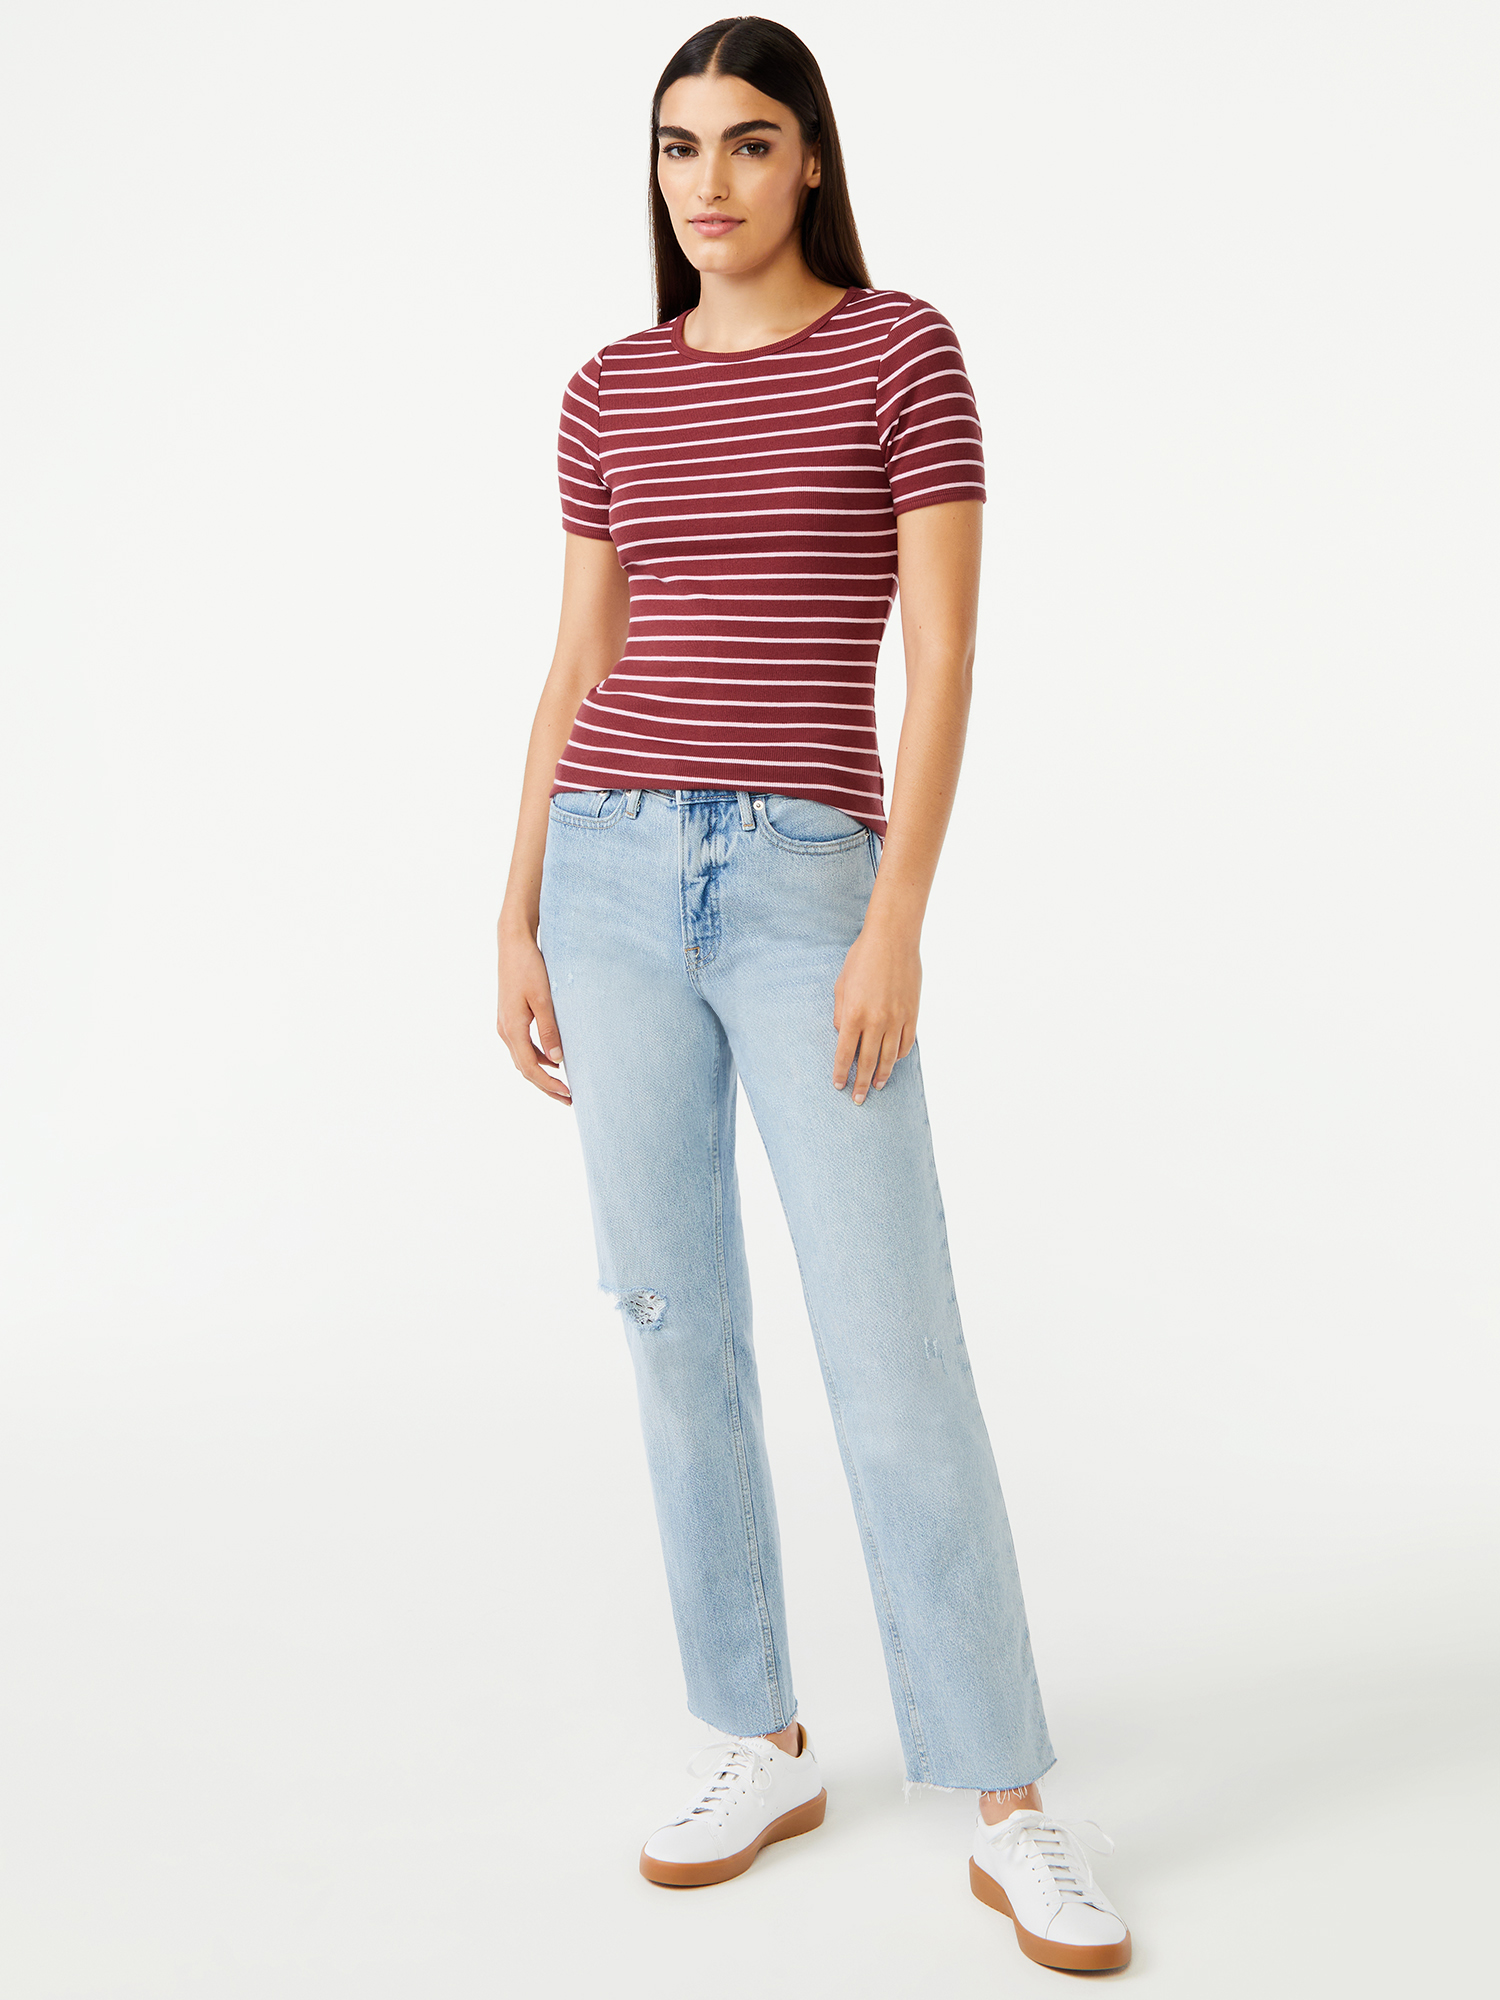 Free Assembly Women's Super High Rise Straight Jeans - image 2 of 6